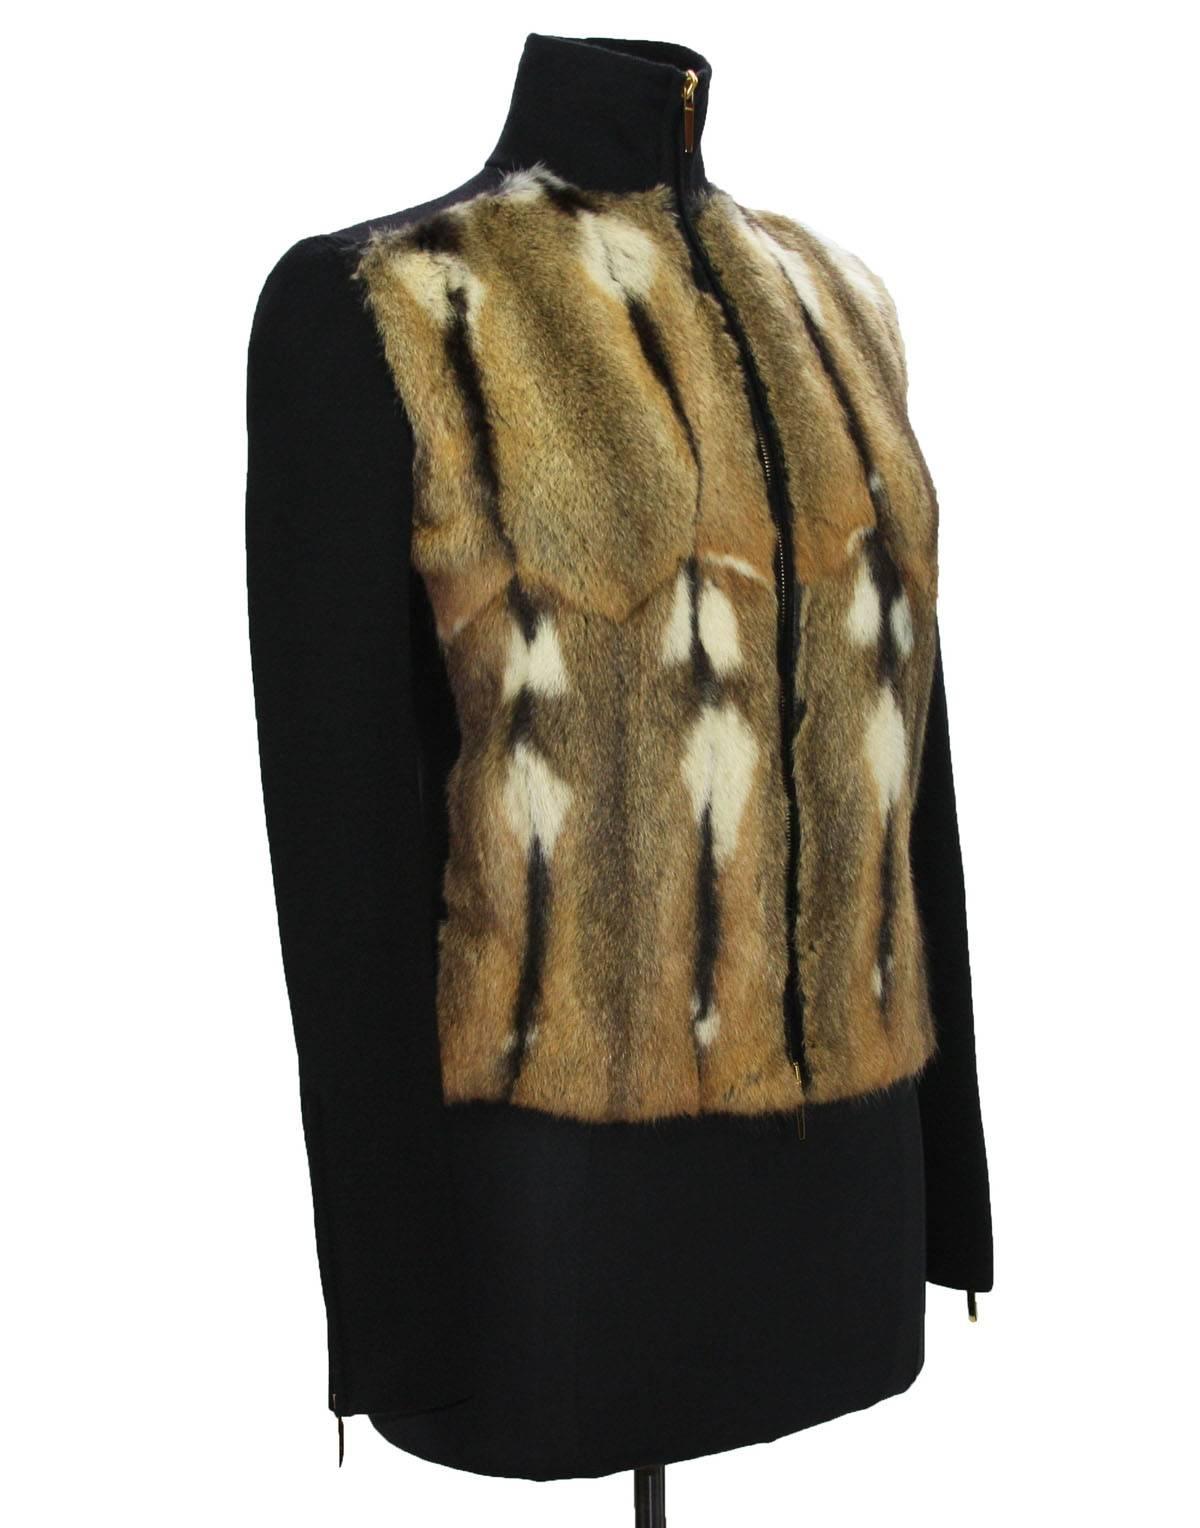 New GUCCI by TOM FORD Fur Wool Cardigan
F/W 2000 Collection
Italian Size S
Color – Black, Brown
Composition – Hamster Fur, 70% Wool (stretch), 20% Silk, 10% Cashmere.
Mock Turtleneck
Zip Closure at Front
Long Sleeve with Zip
Logo Lining at